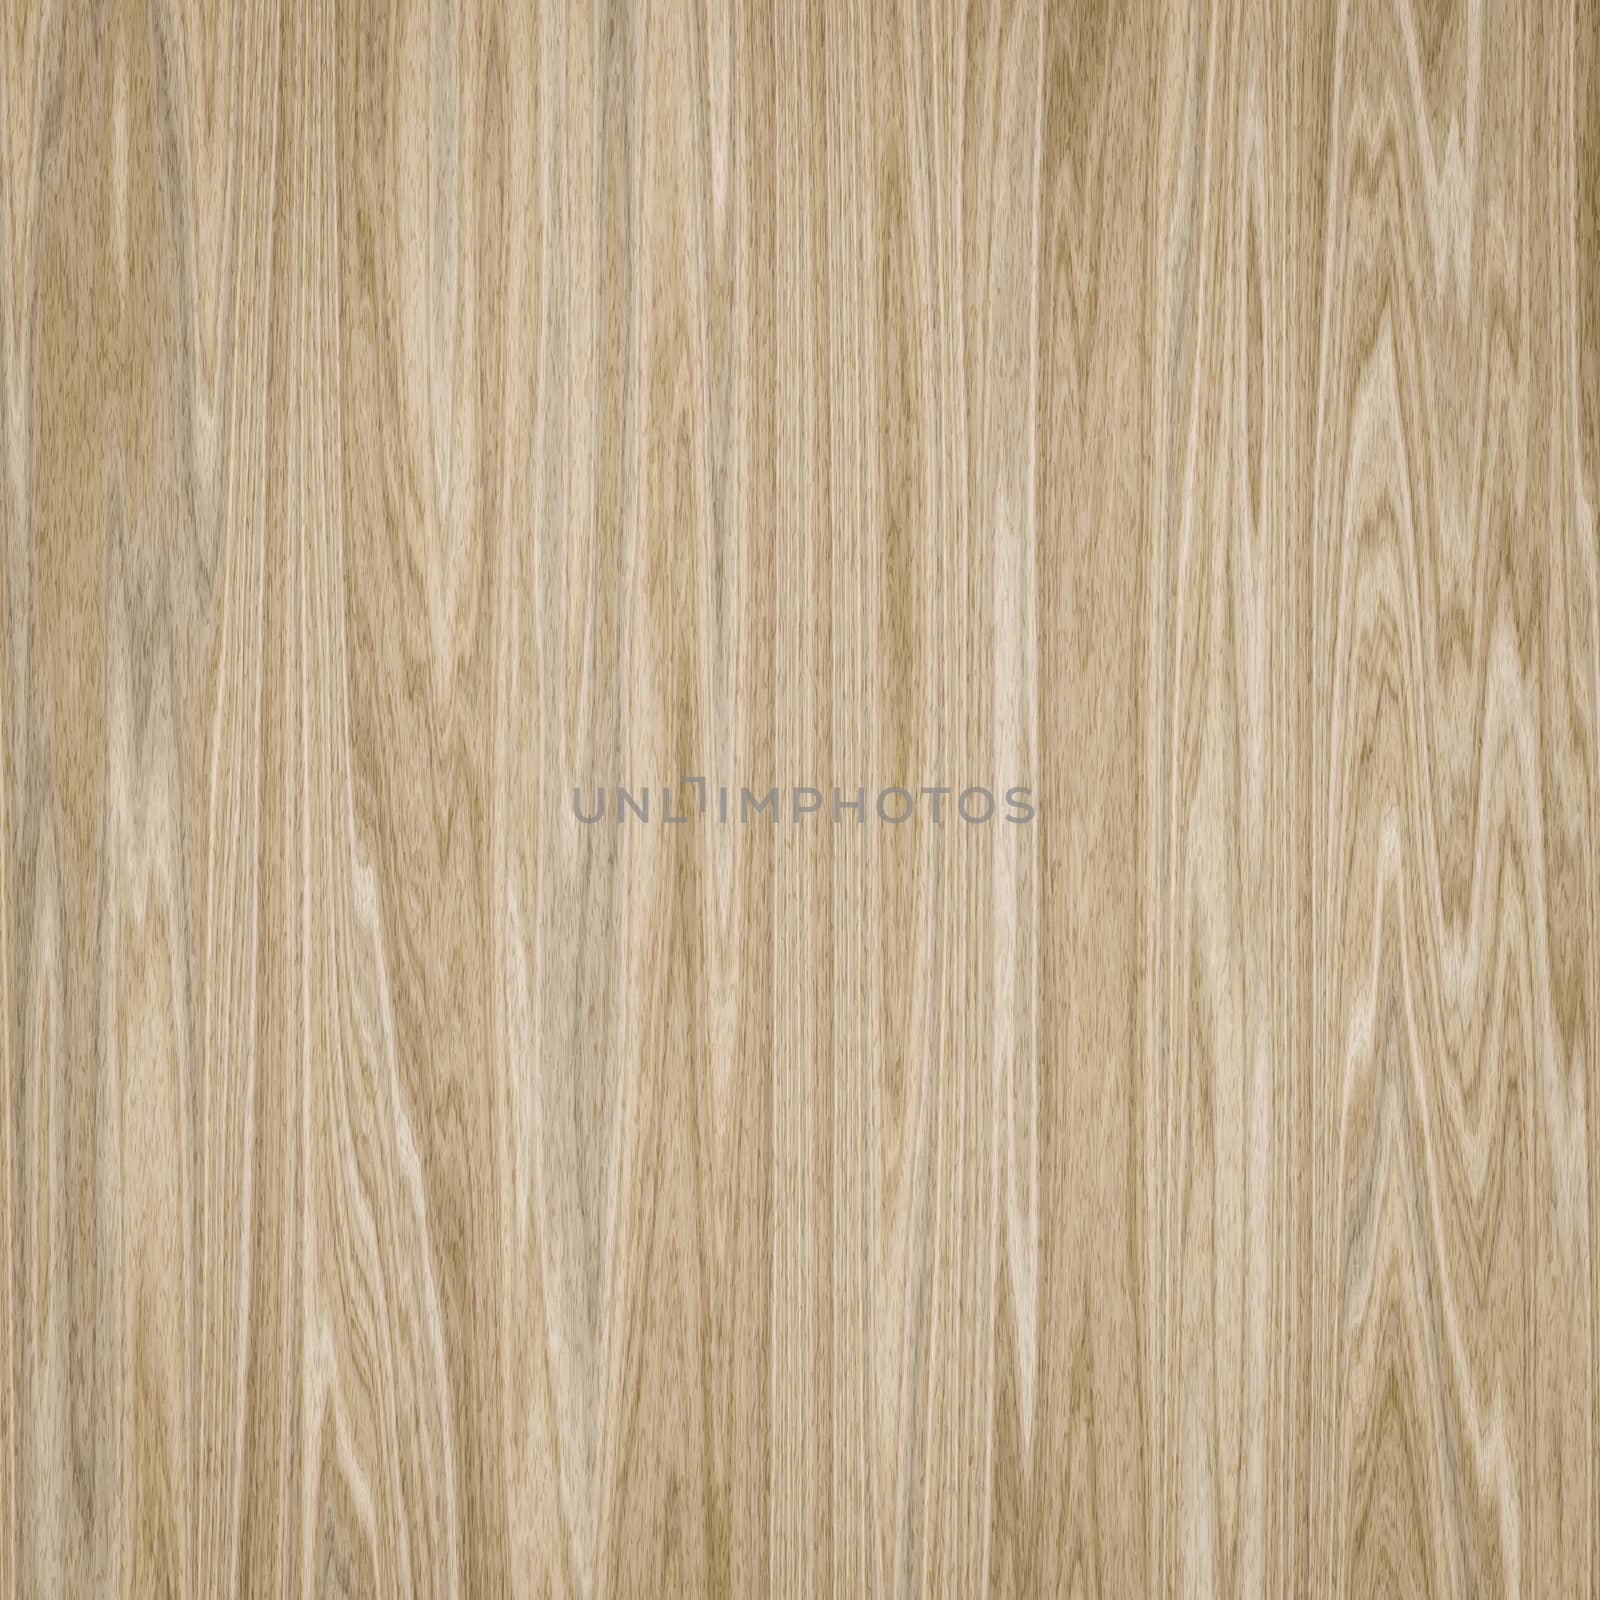 An illustration of a typical wooden background